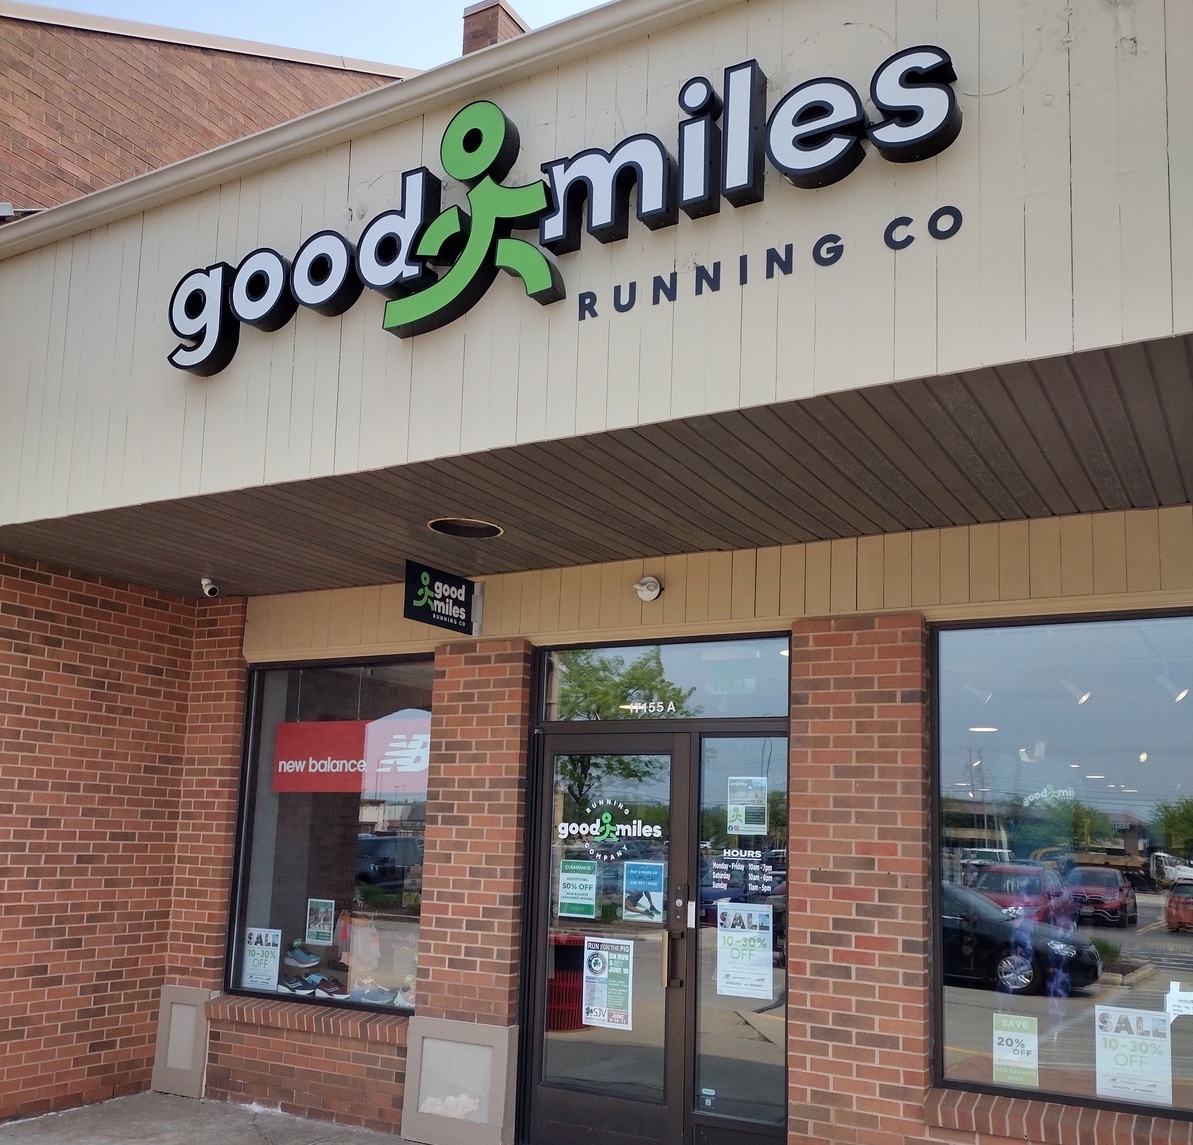 Goodmiles Running Company storefront